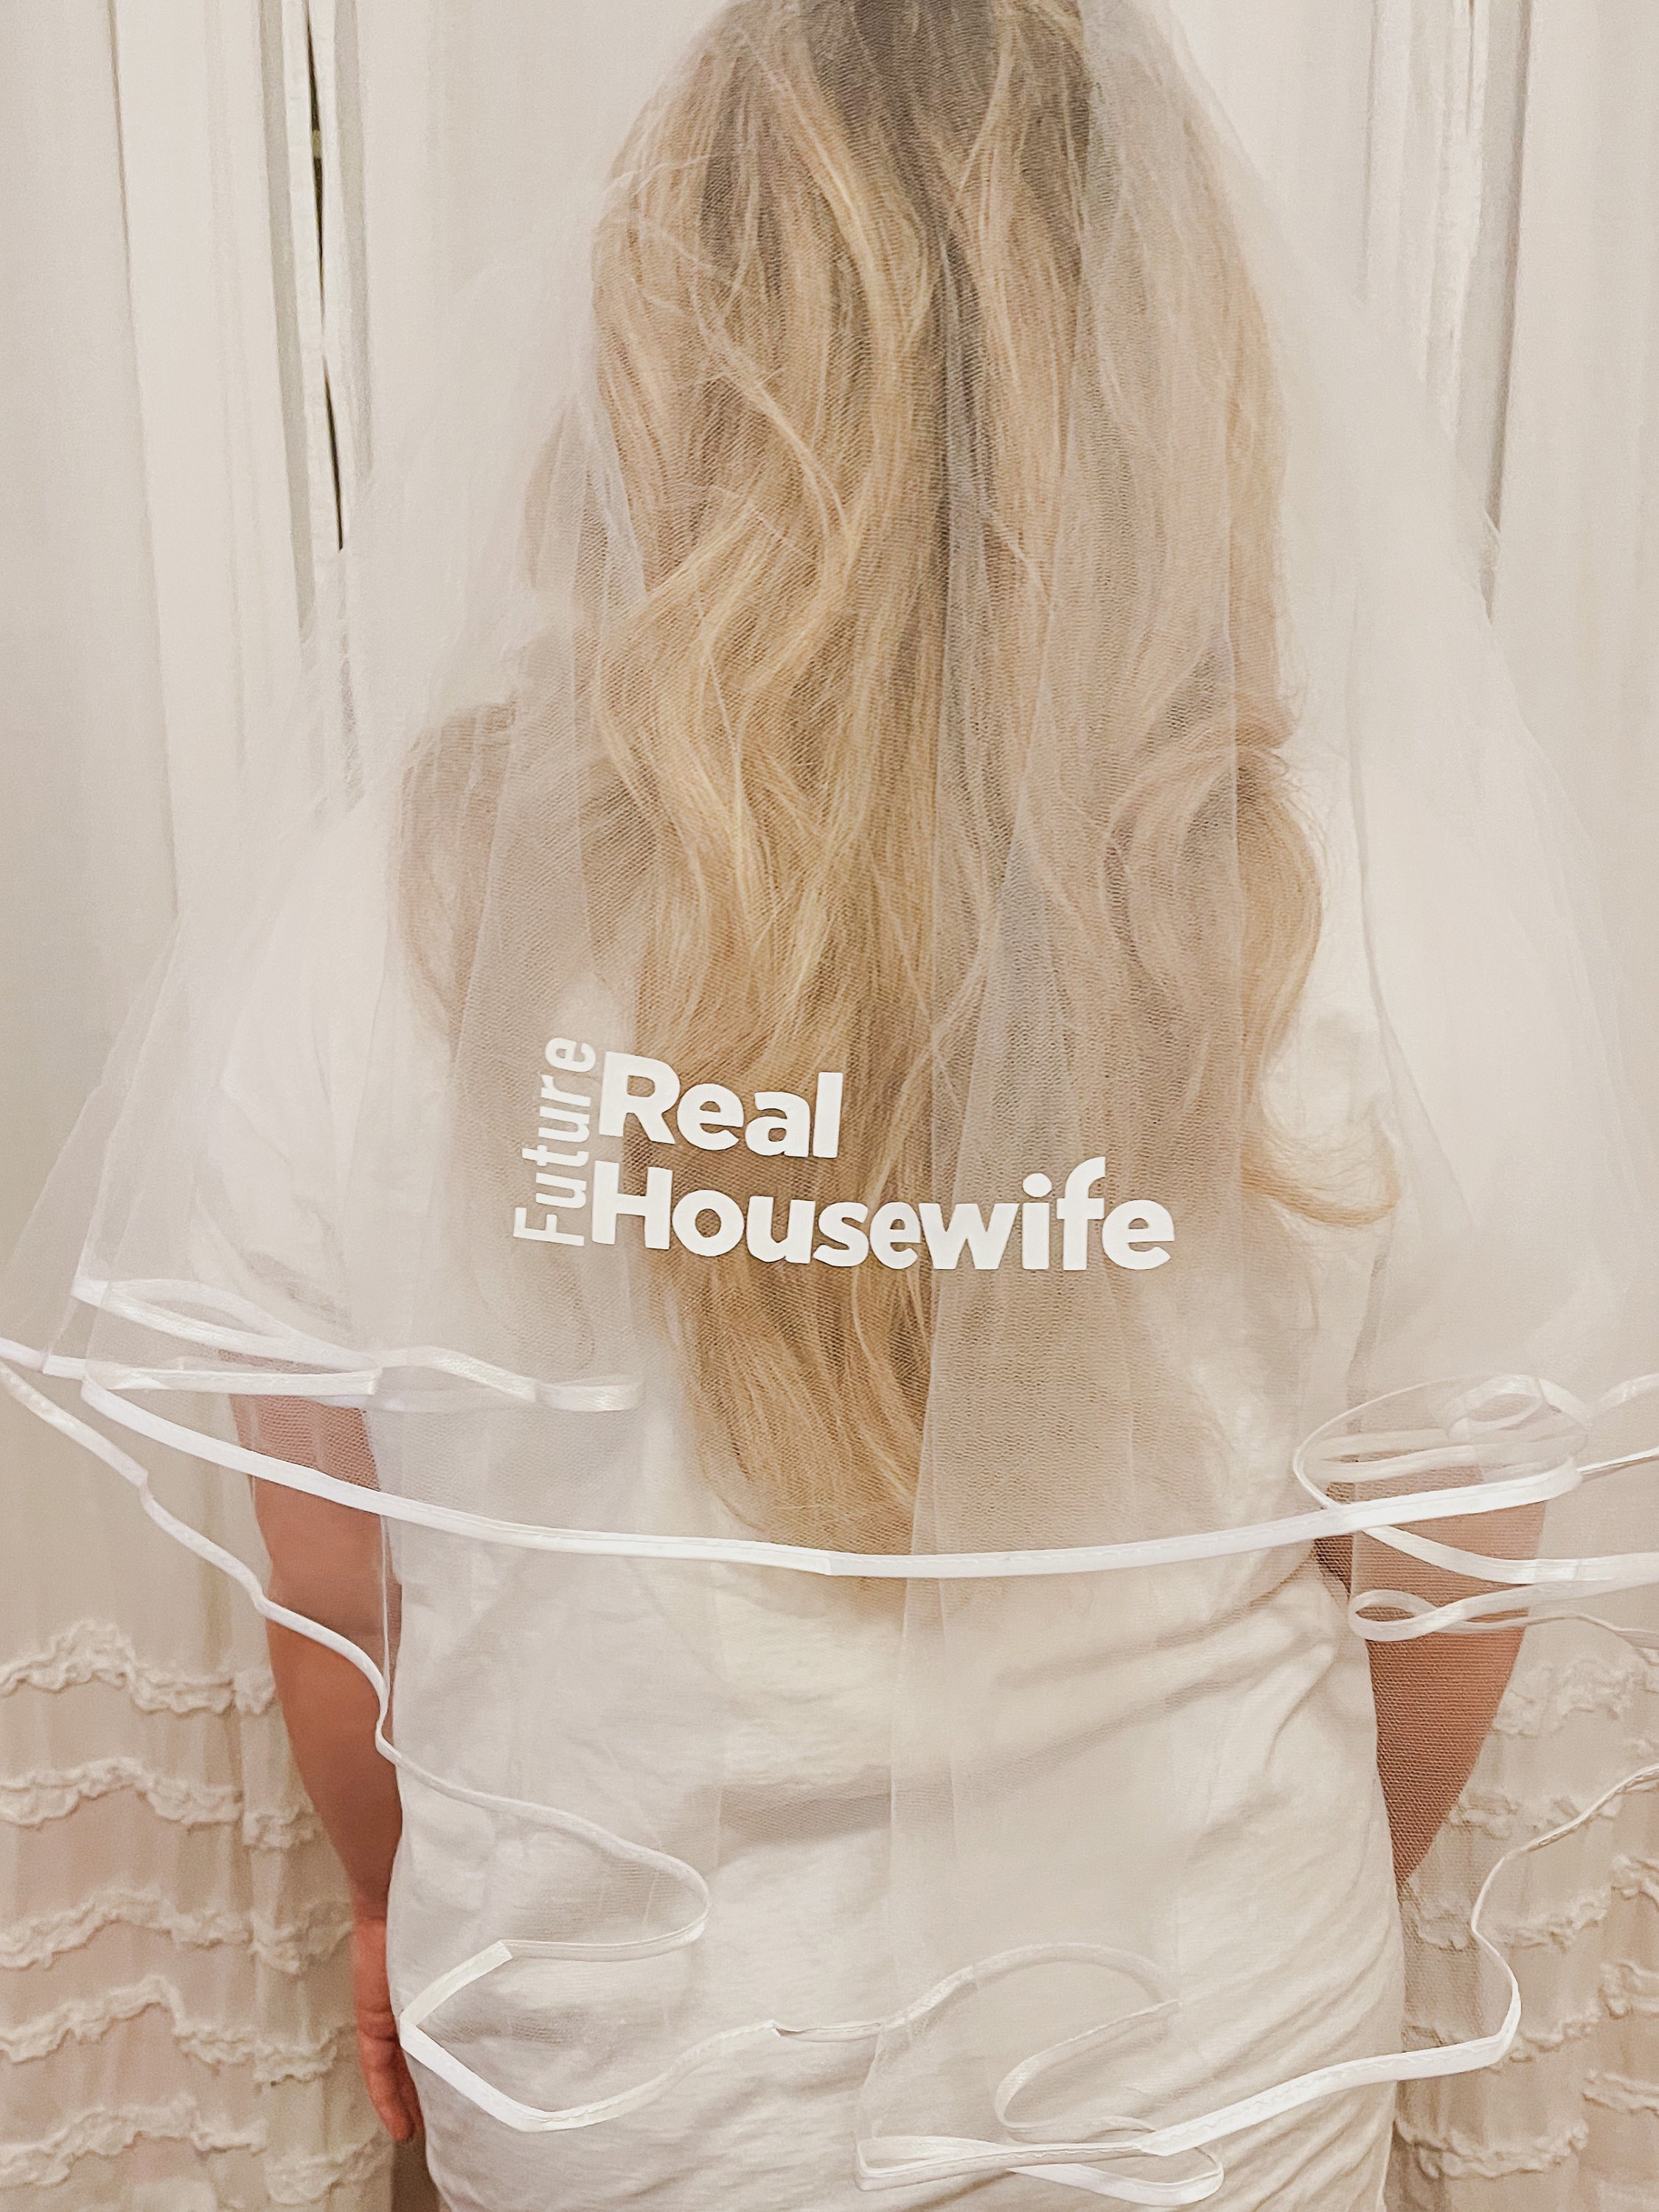 Real Housewives Inspired Bridal Veil Future Real Housewife pic